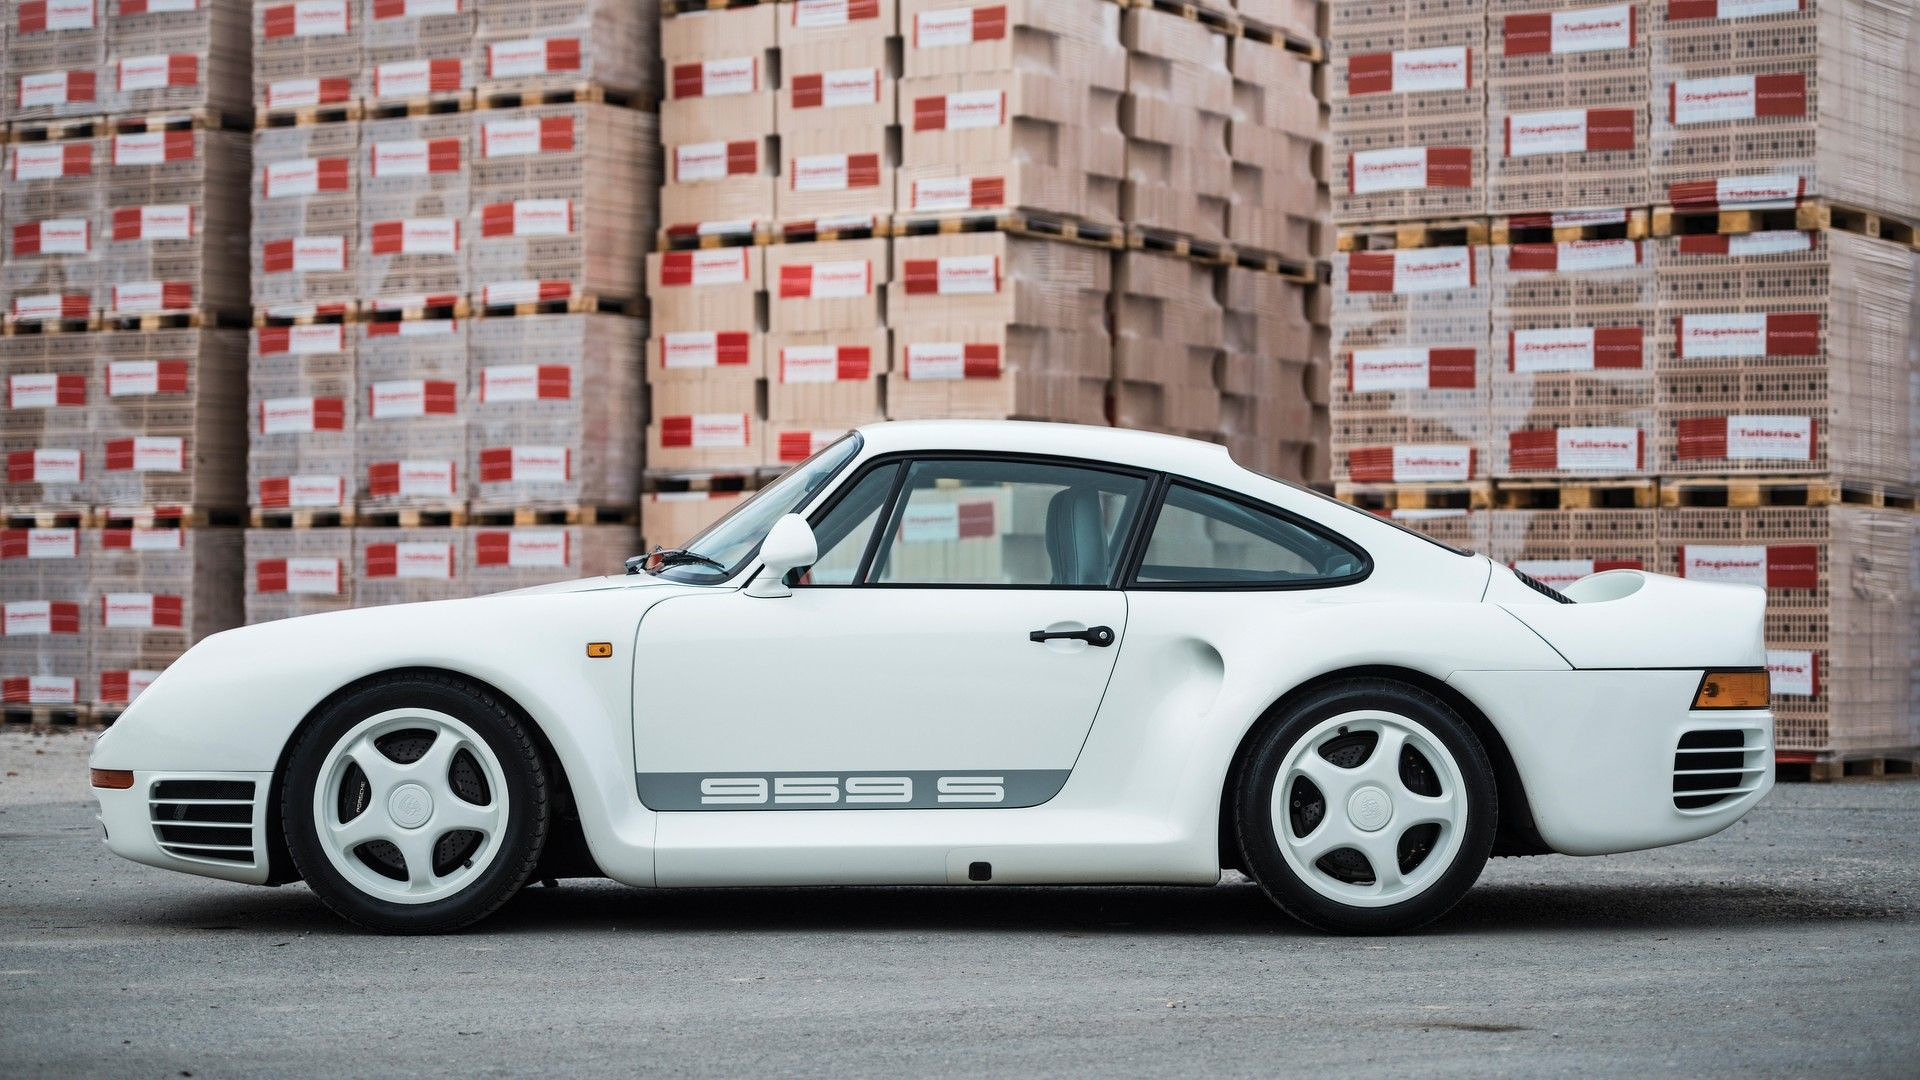 Porsche 959: A Triumph of Engineering Excellence and Motorsport Dominance